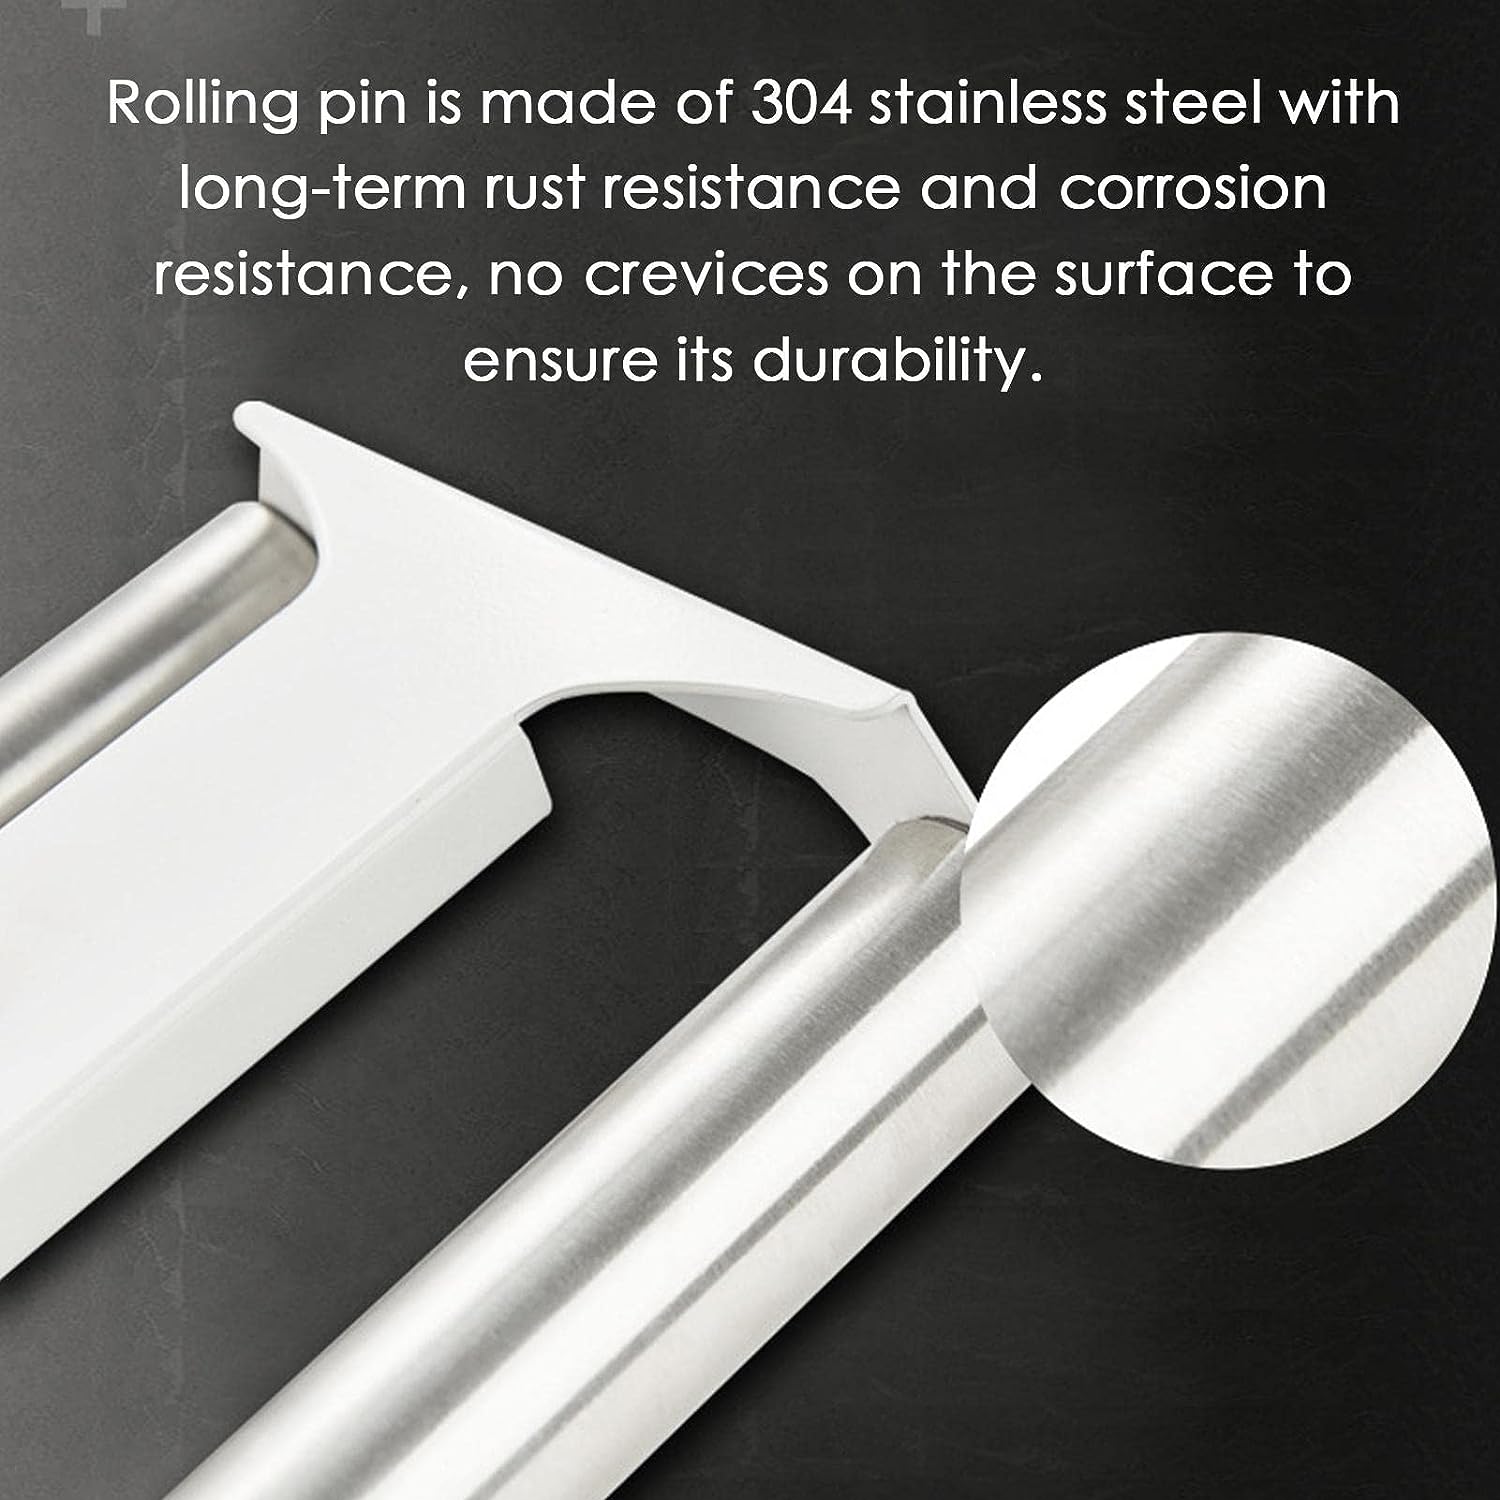 Double-Sided Stainless Steel Dough Roller for Baking - This rolling pin is made of 304 steel, ensuring long-term resistance and durability